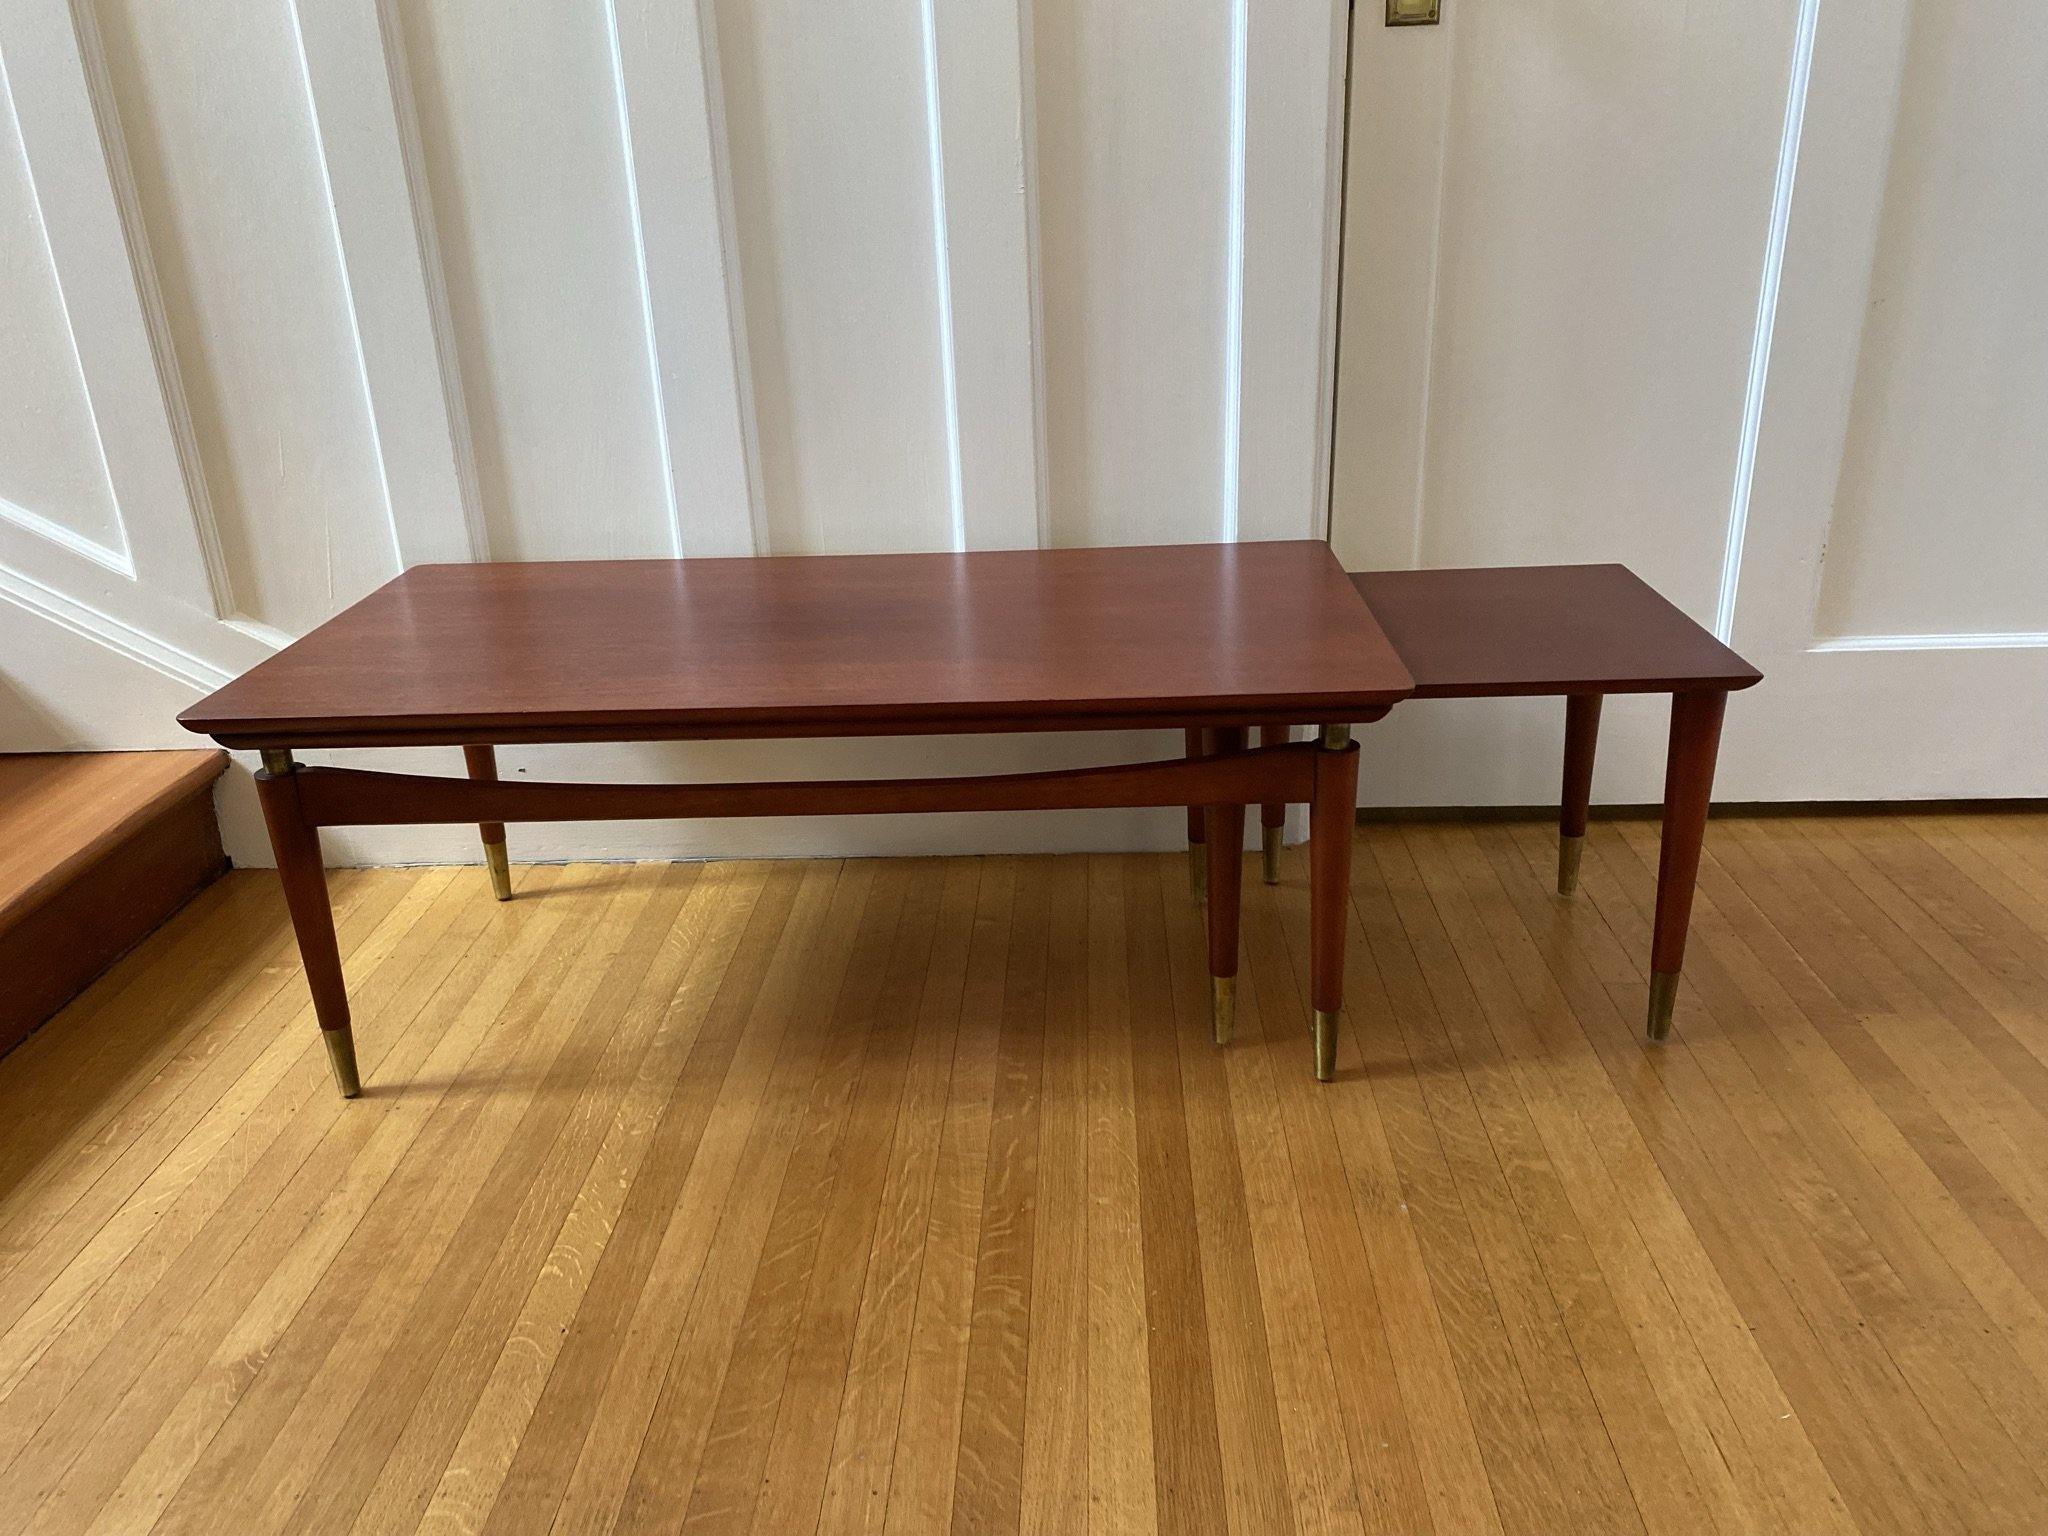 Unique Nesting Coffee Tables - Cook Street Vintage